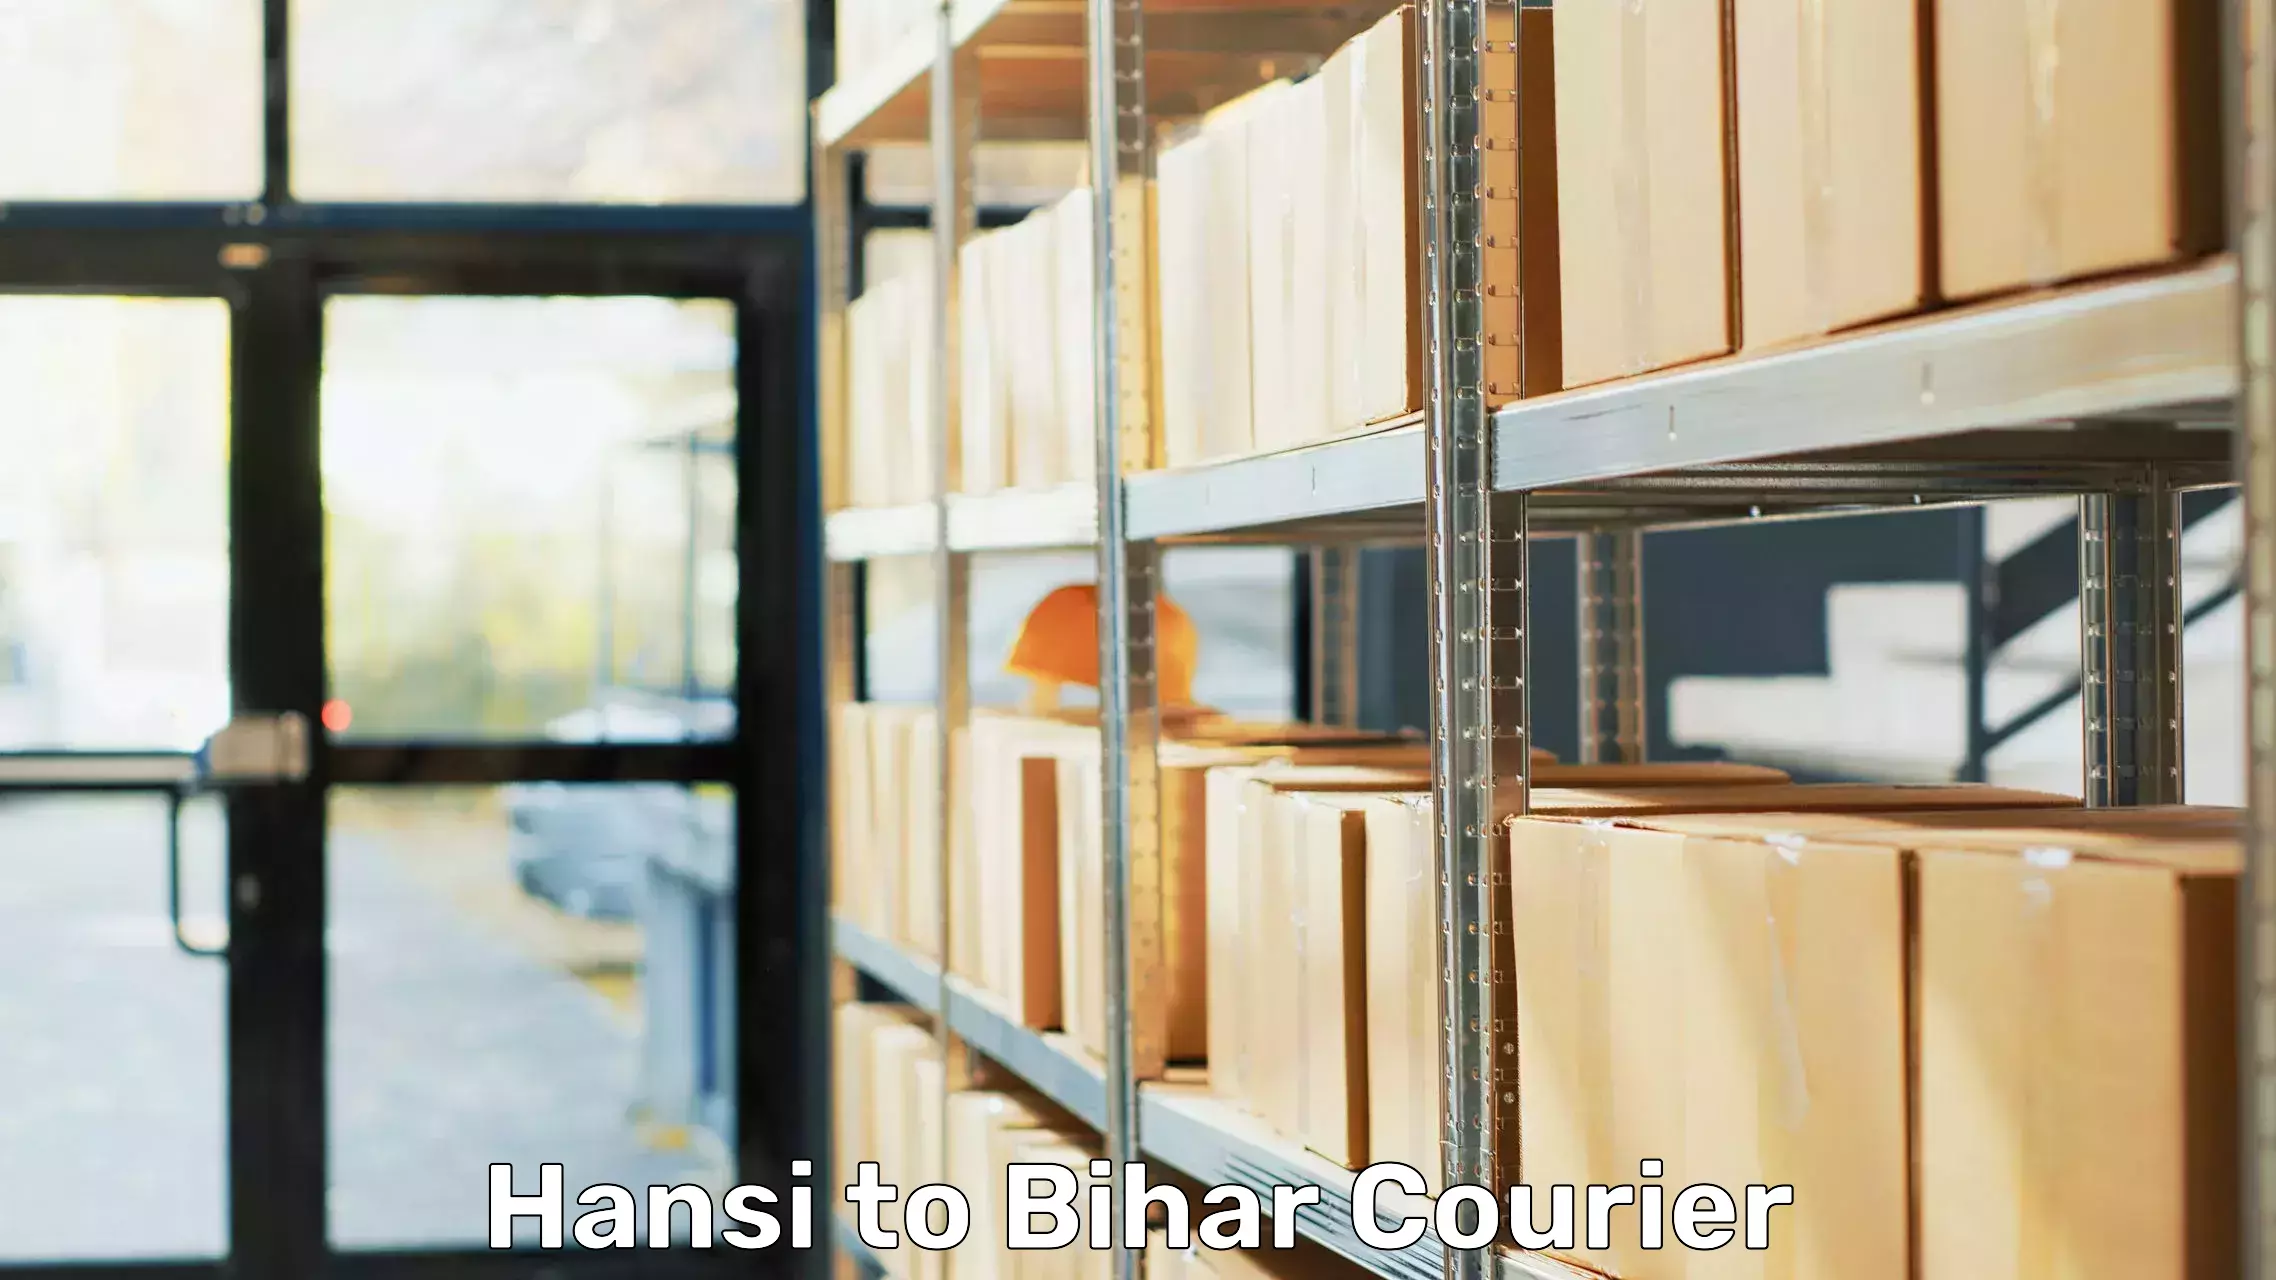 Furniture moving specialists Hansi to Fatwah